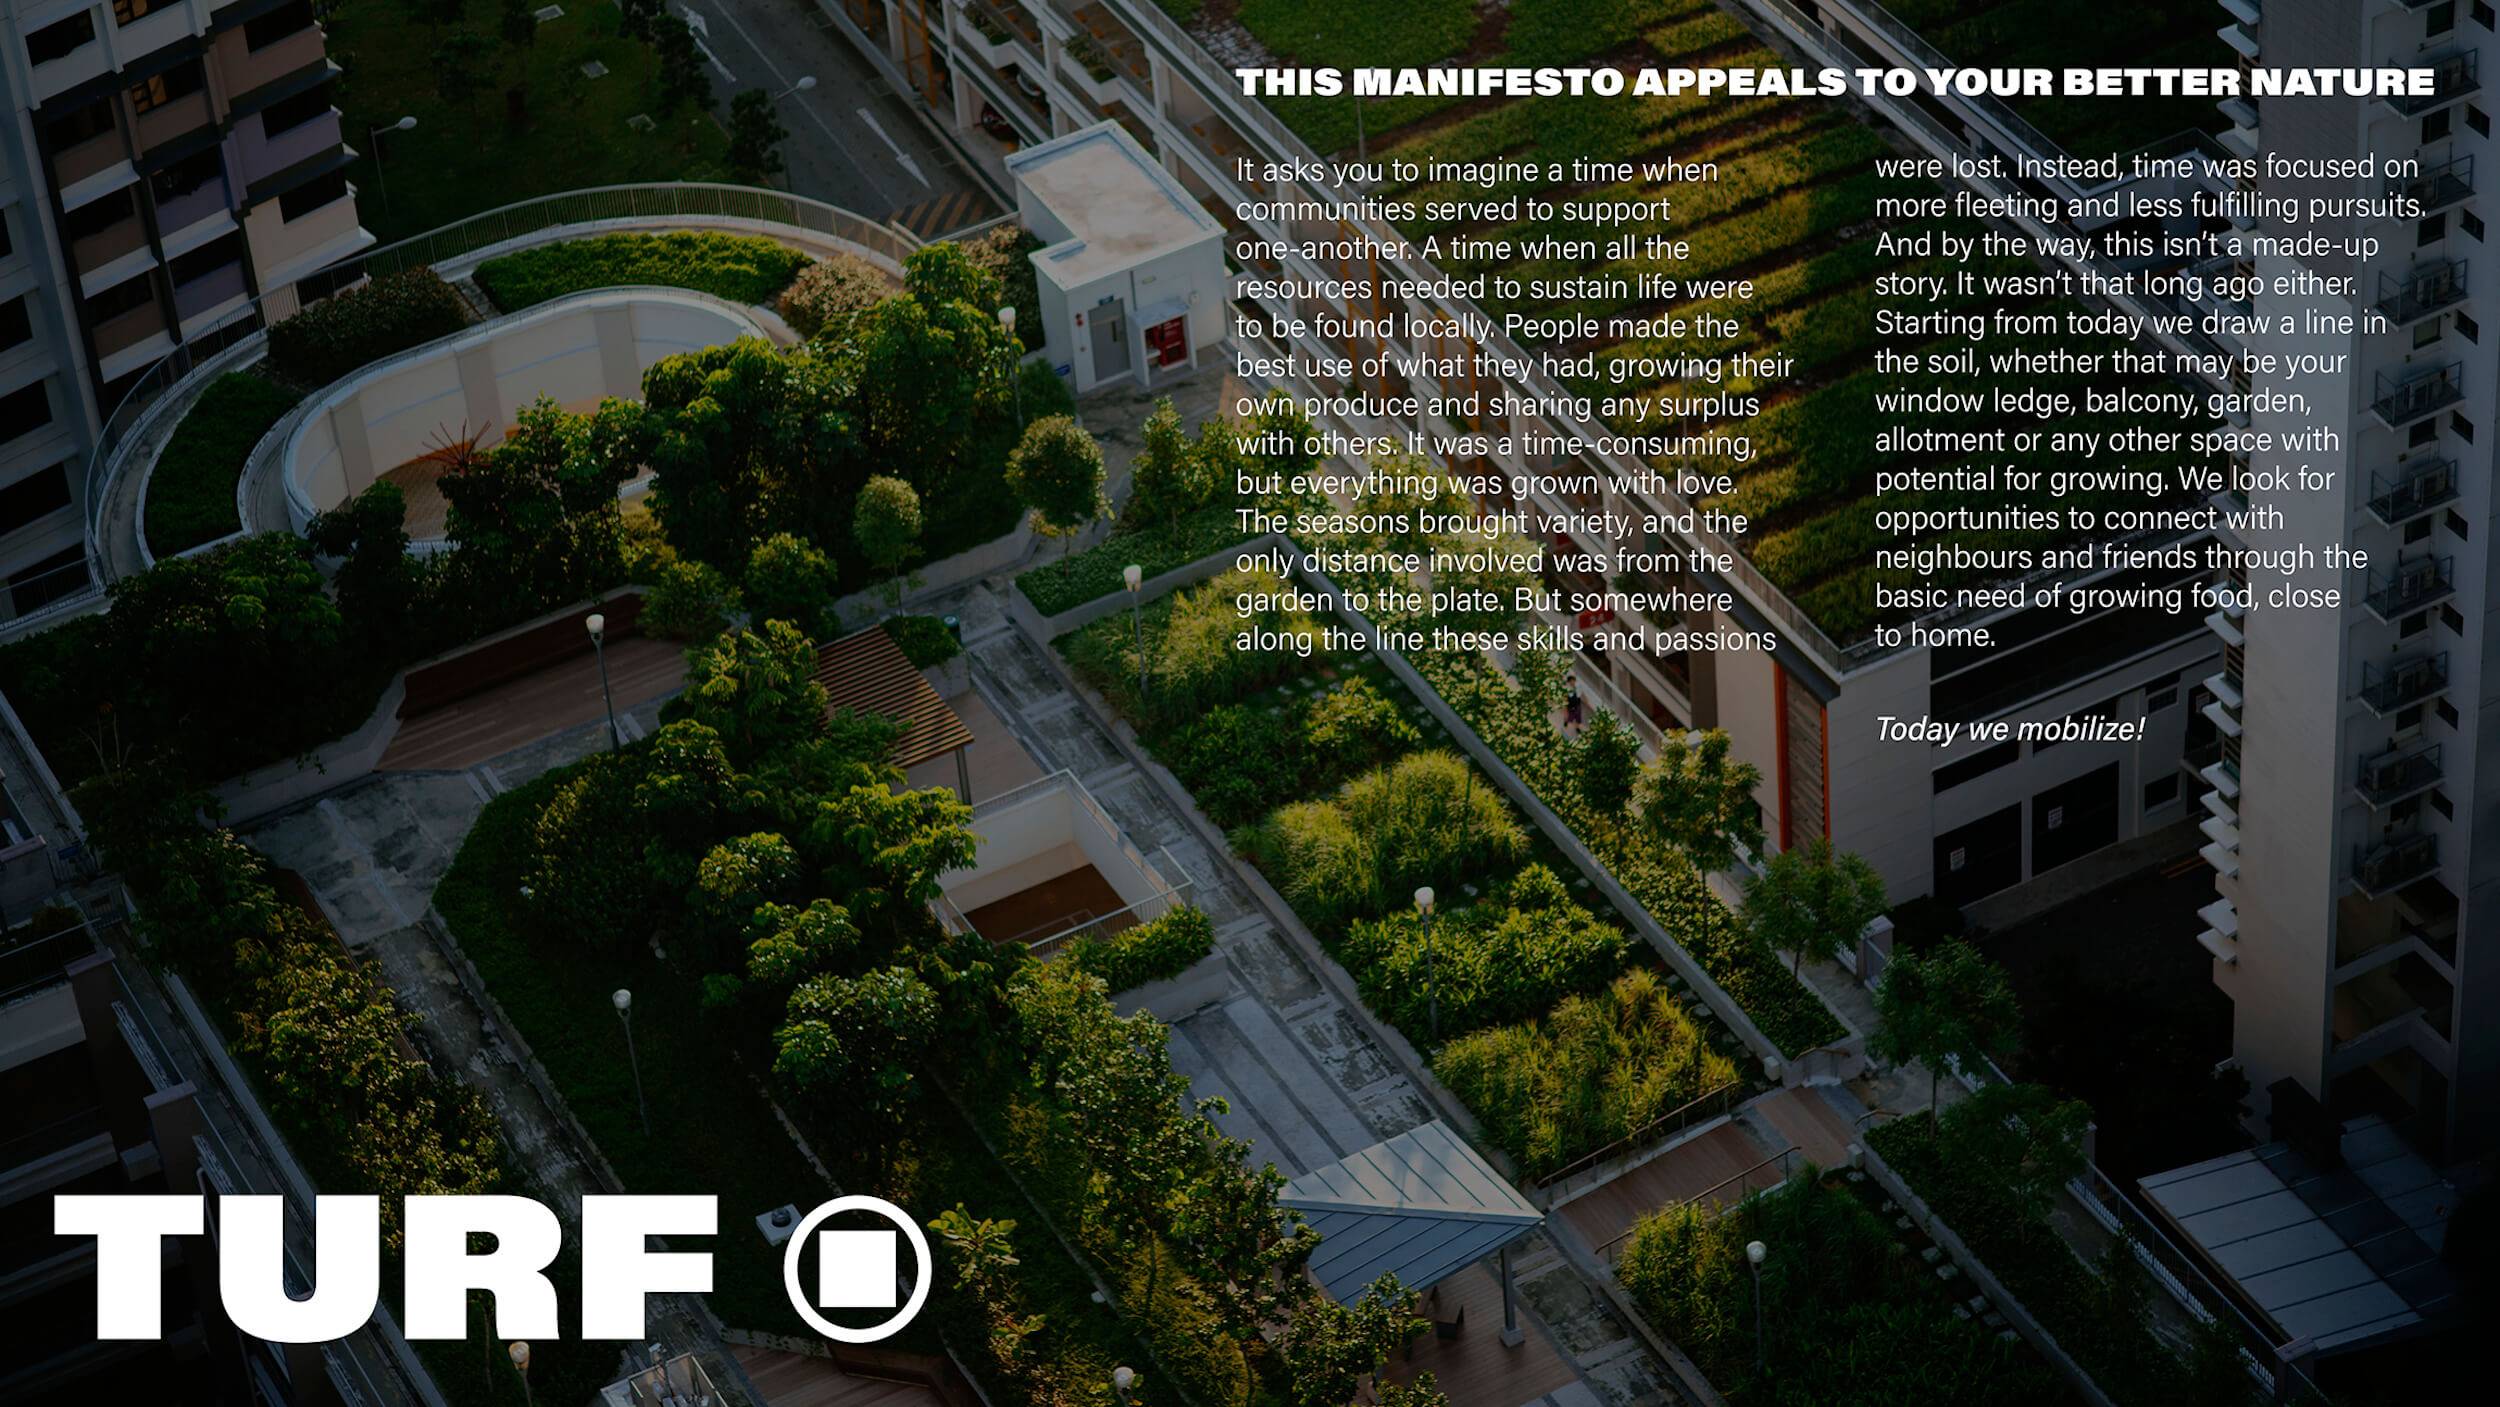 TURF manifesto over an image of a rooftop covered in plant beds